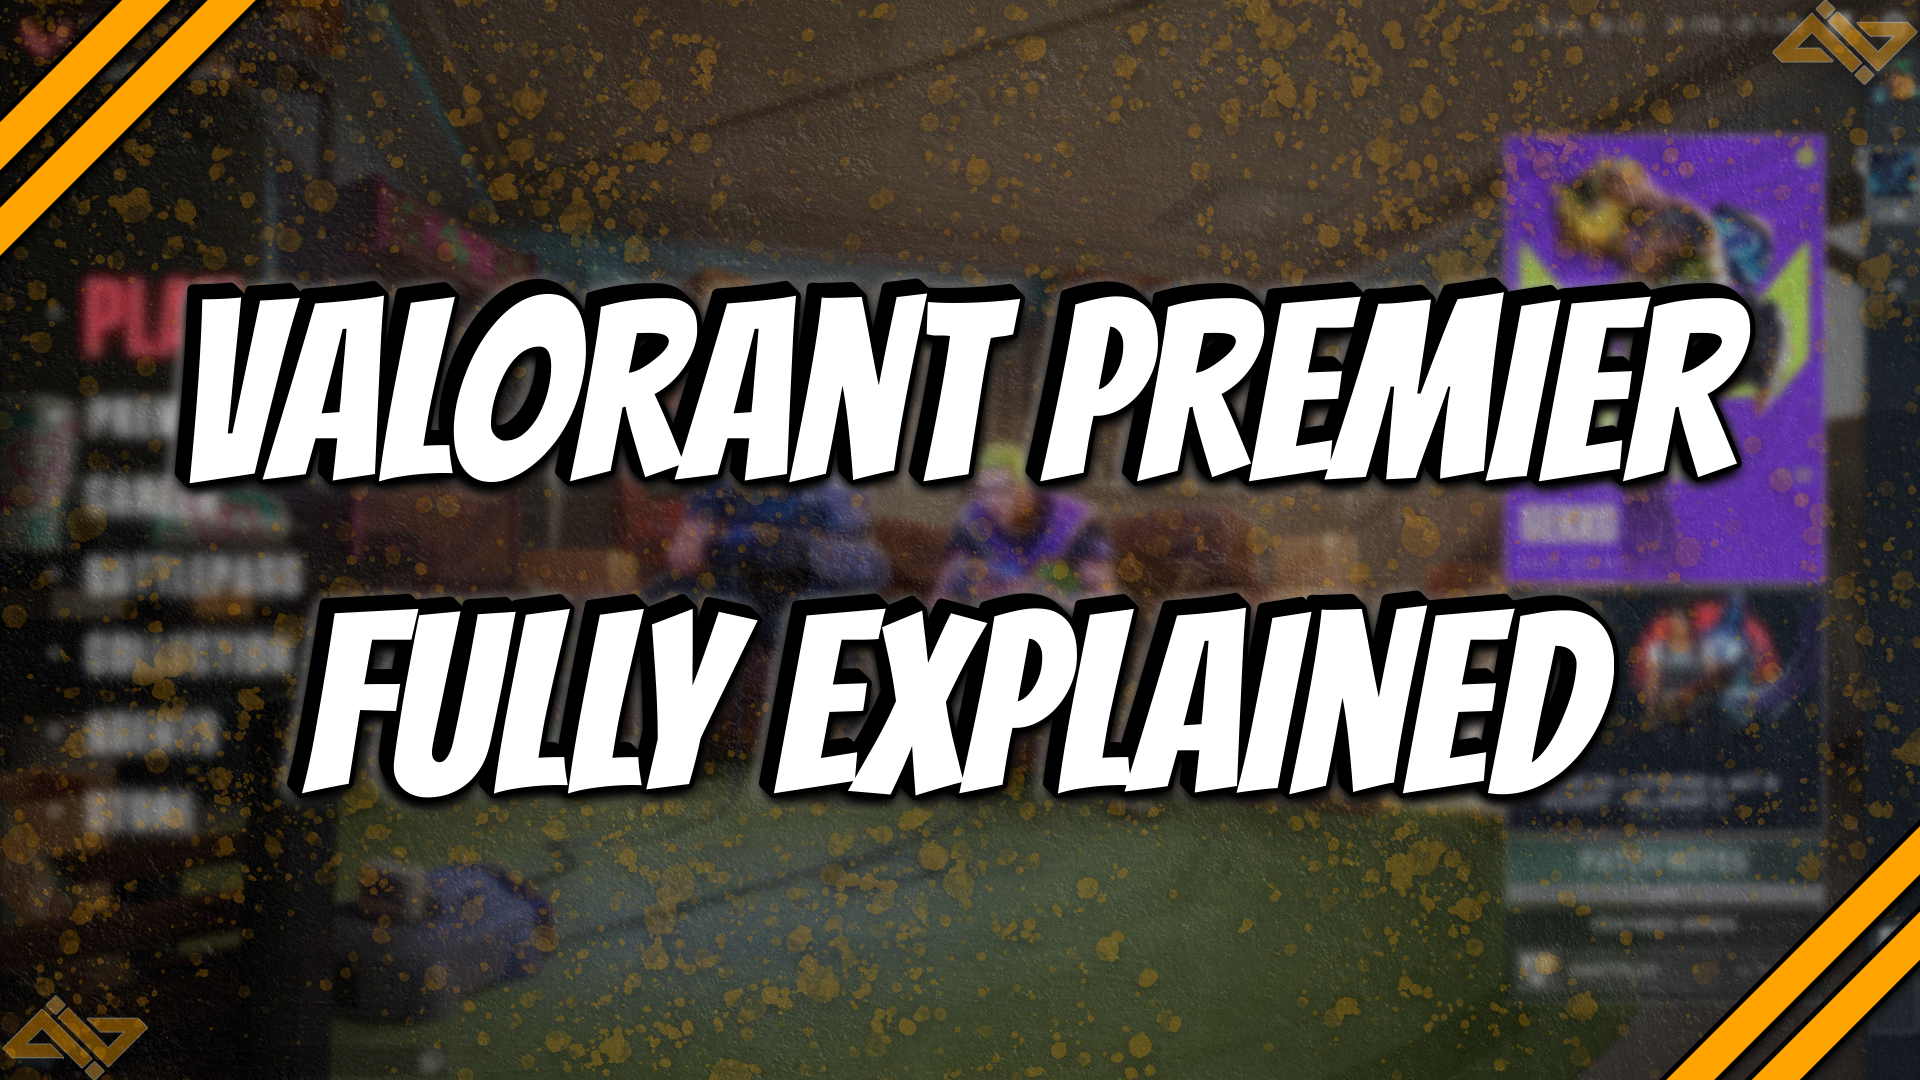 Valorant Premier: The Newest Game Mode Fully Explained title card.